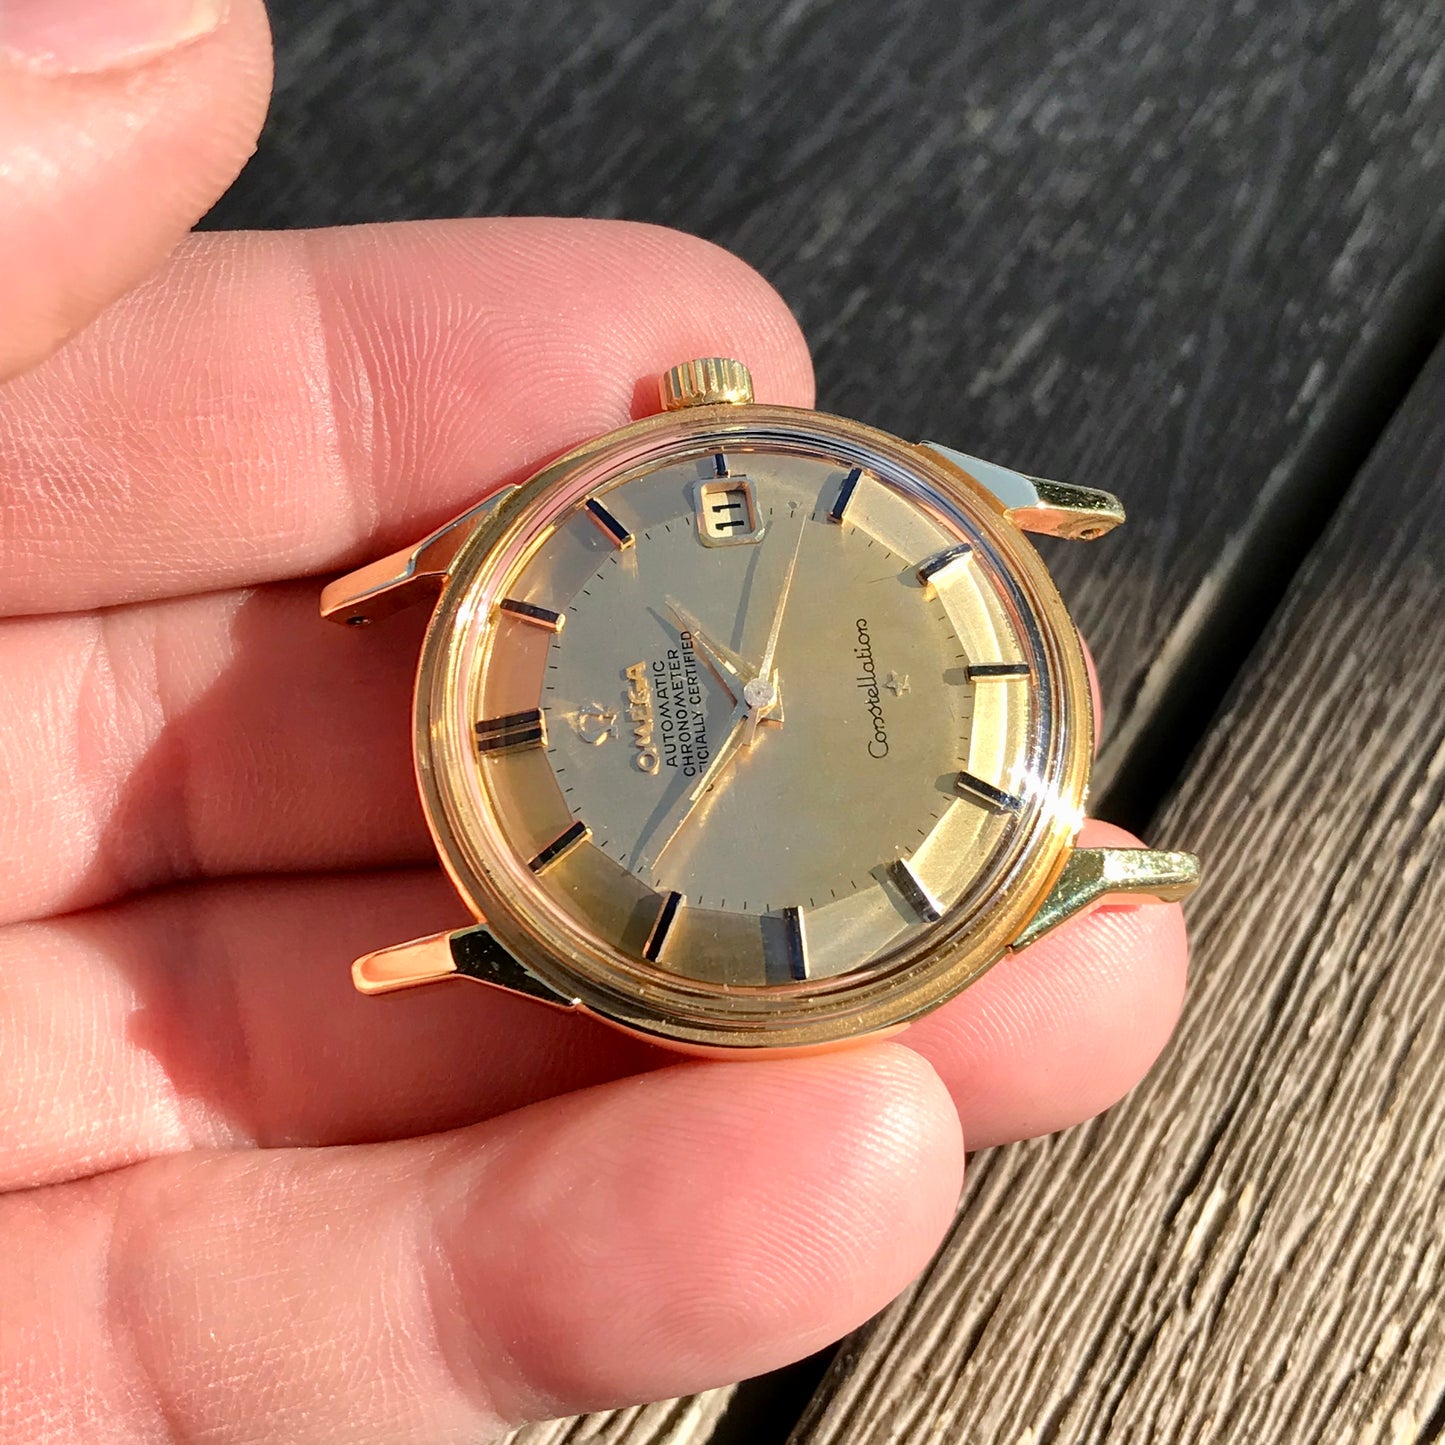 Vintage Omega Constellation Date 168.005 18K Yellow Gold Caliber 561 Automatic Wristwatch - Hashtag Watch Company